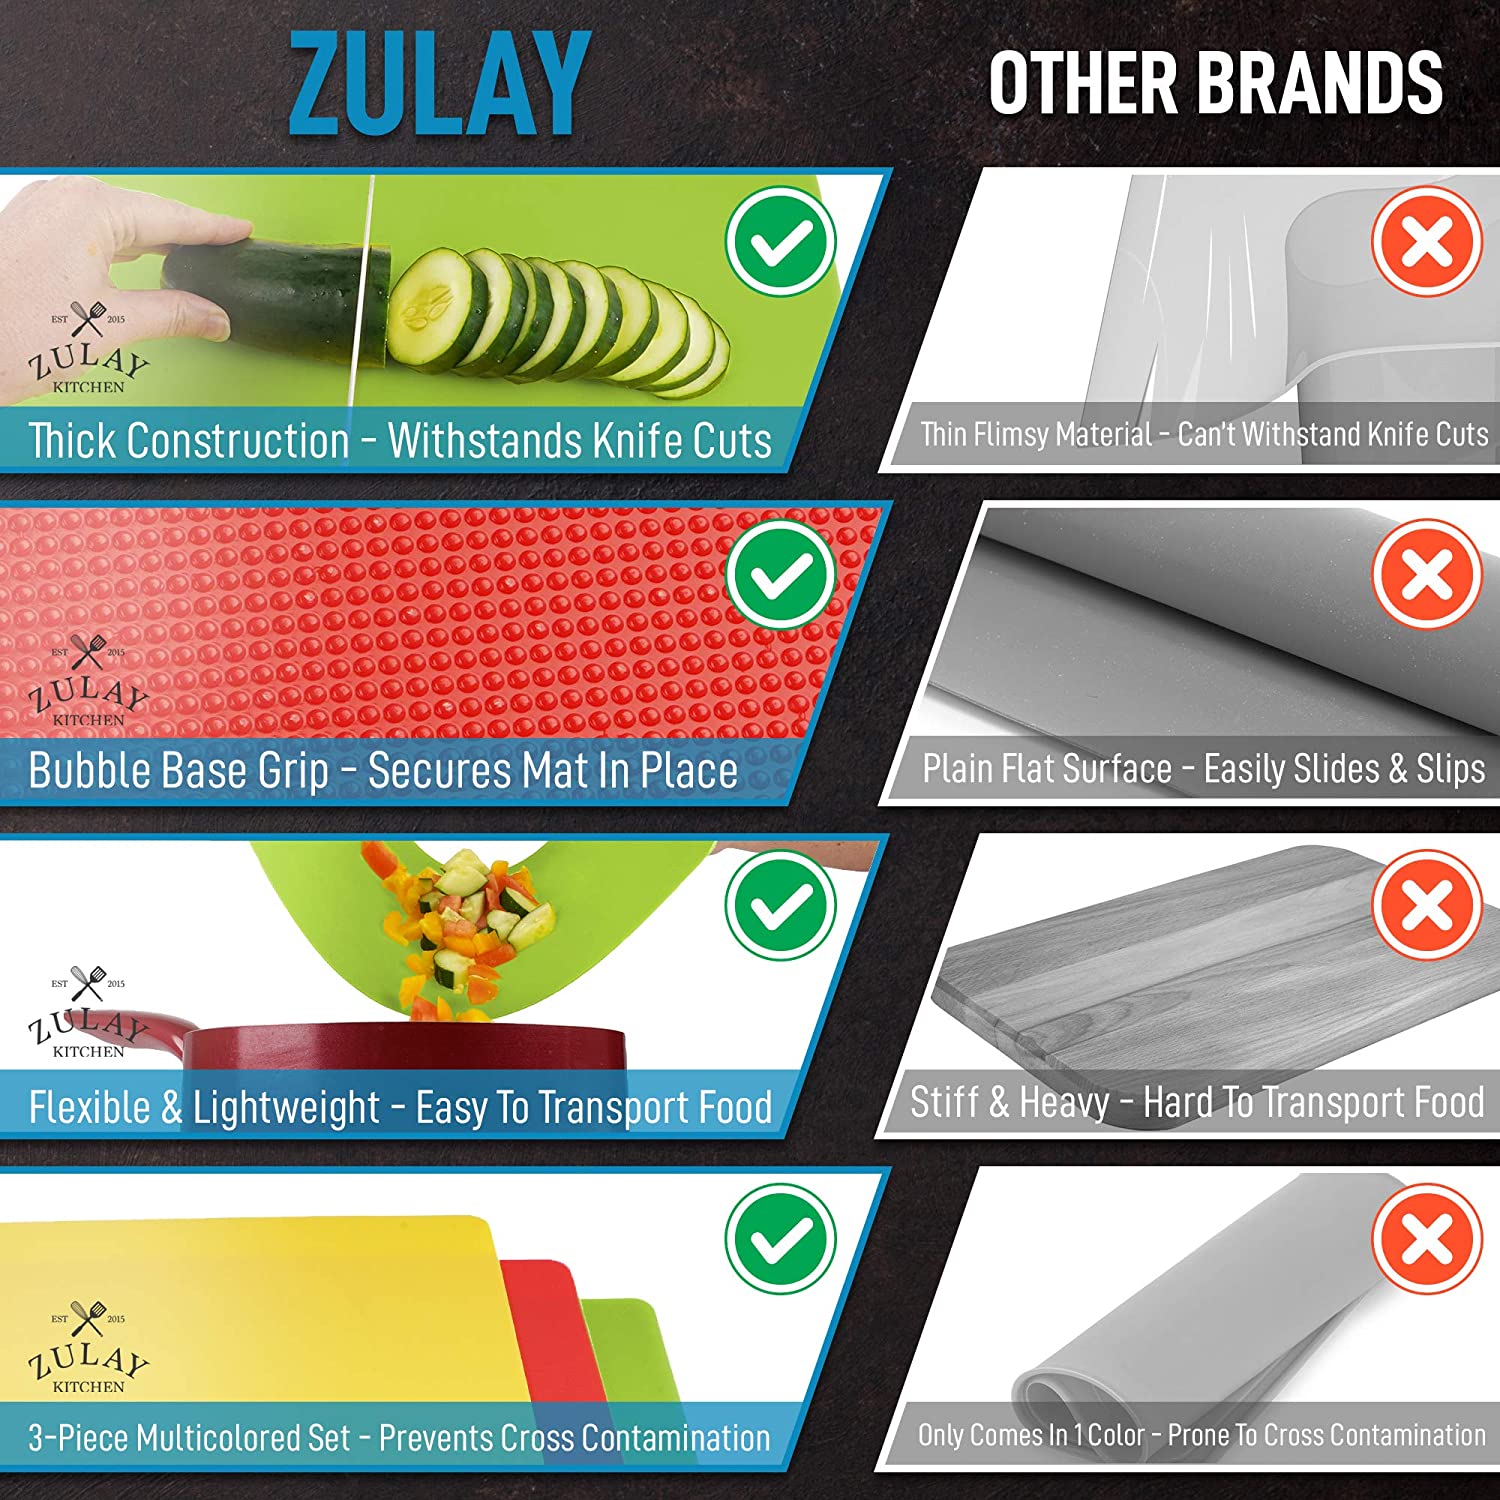  Zulay Extra Thick Flexible Cutting Board Mats for Kitchen -  100% Non Slip Textured Bottom Grip Prevents Slipping on Most Countertops -  Color Coordinated Plastic Cutting Boards Set of 3 (Rectangular)